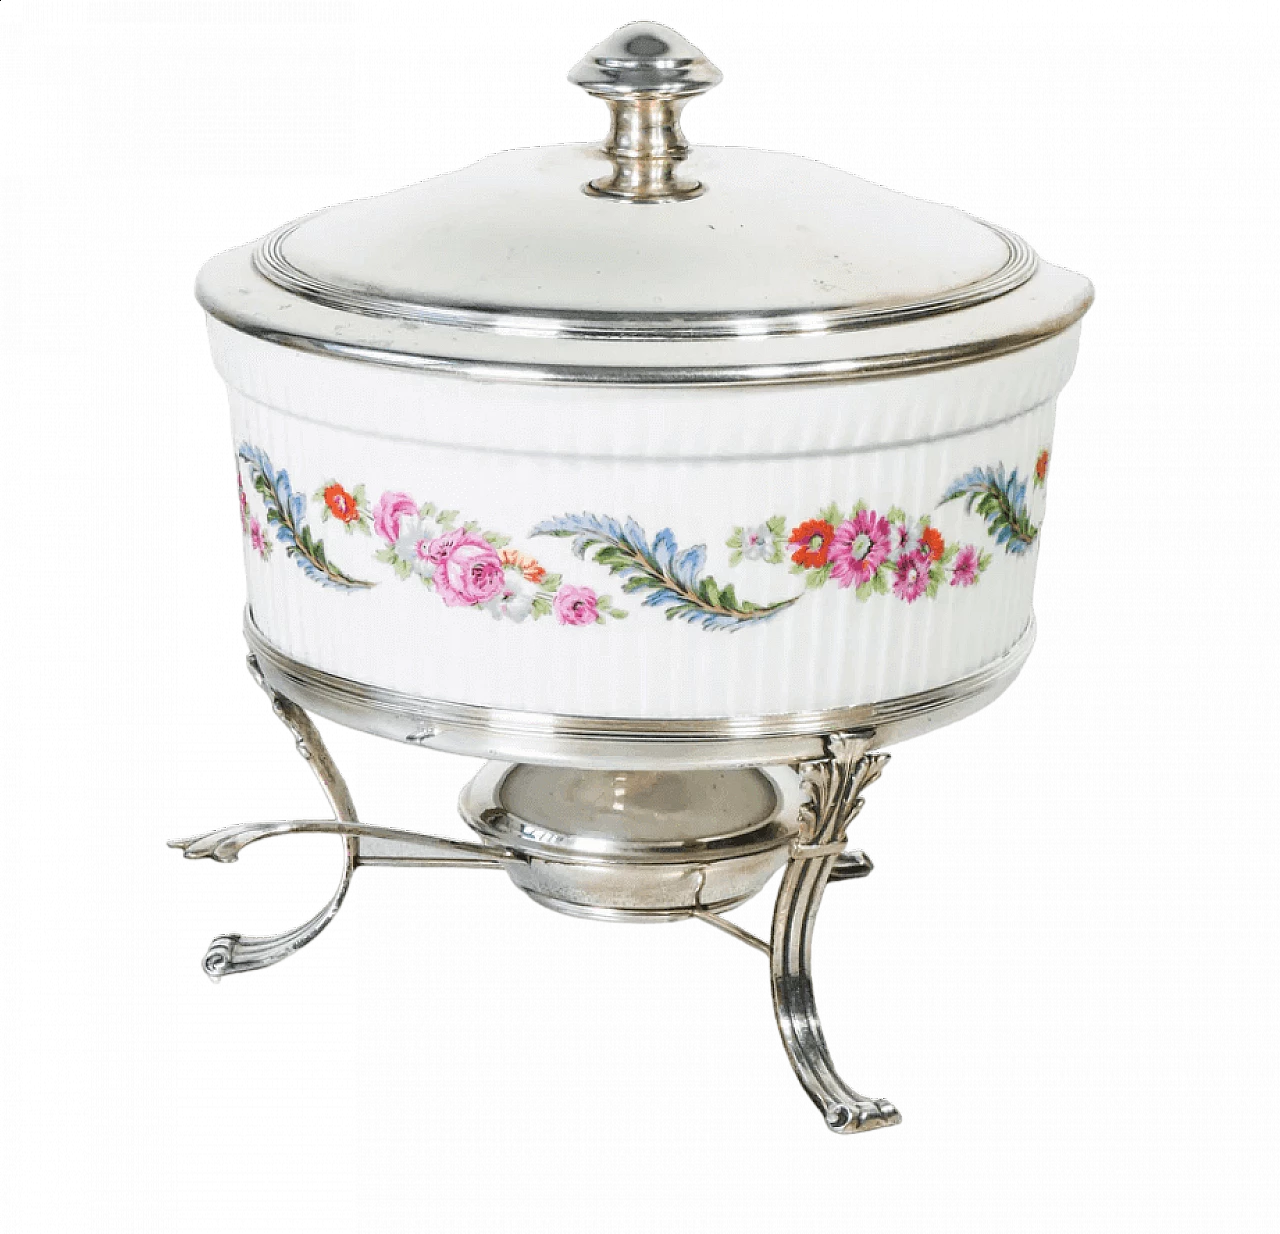 Silver food warmer with porcelain container by CESA Alessandria, mid-19th century 11